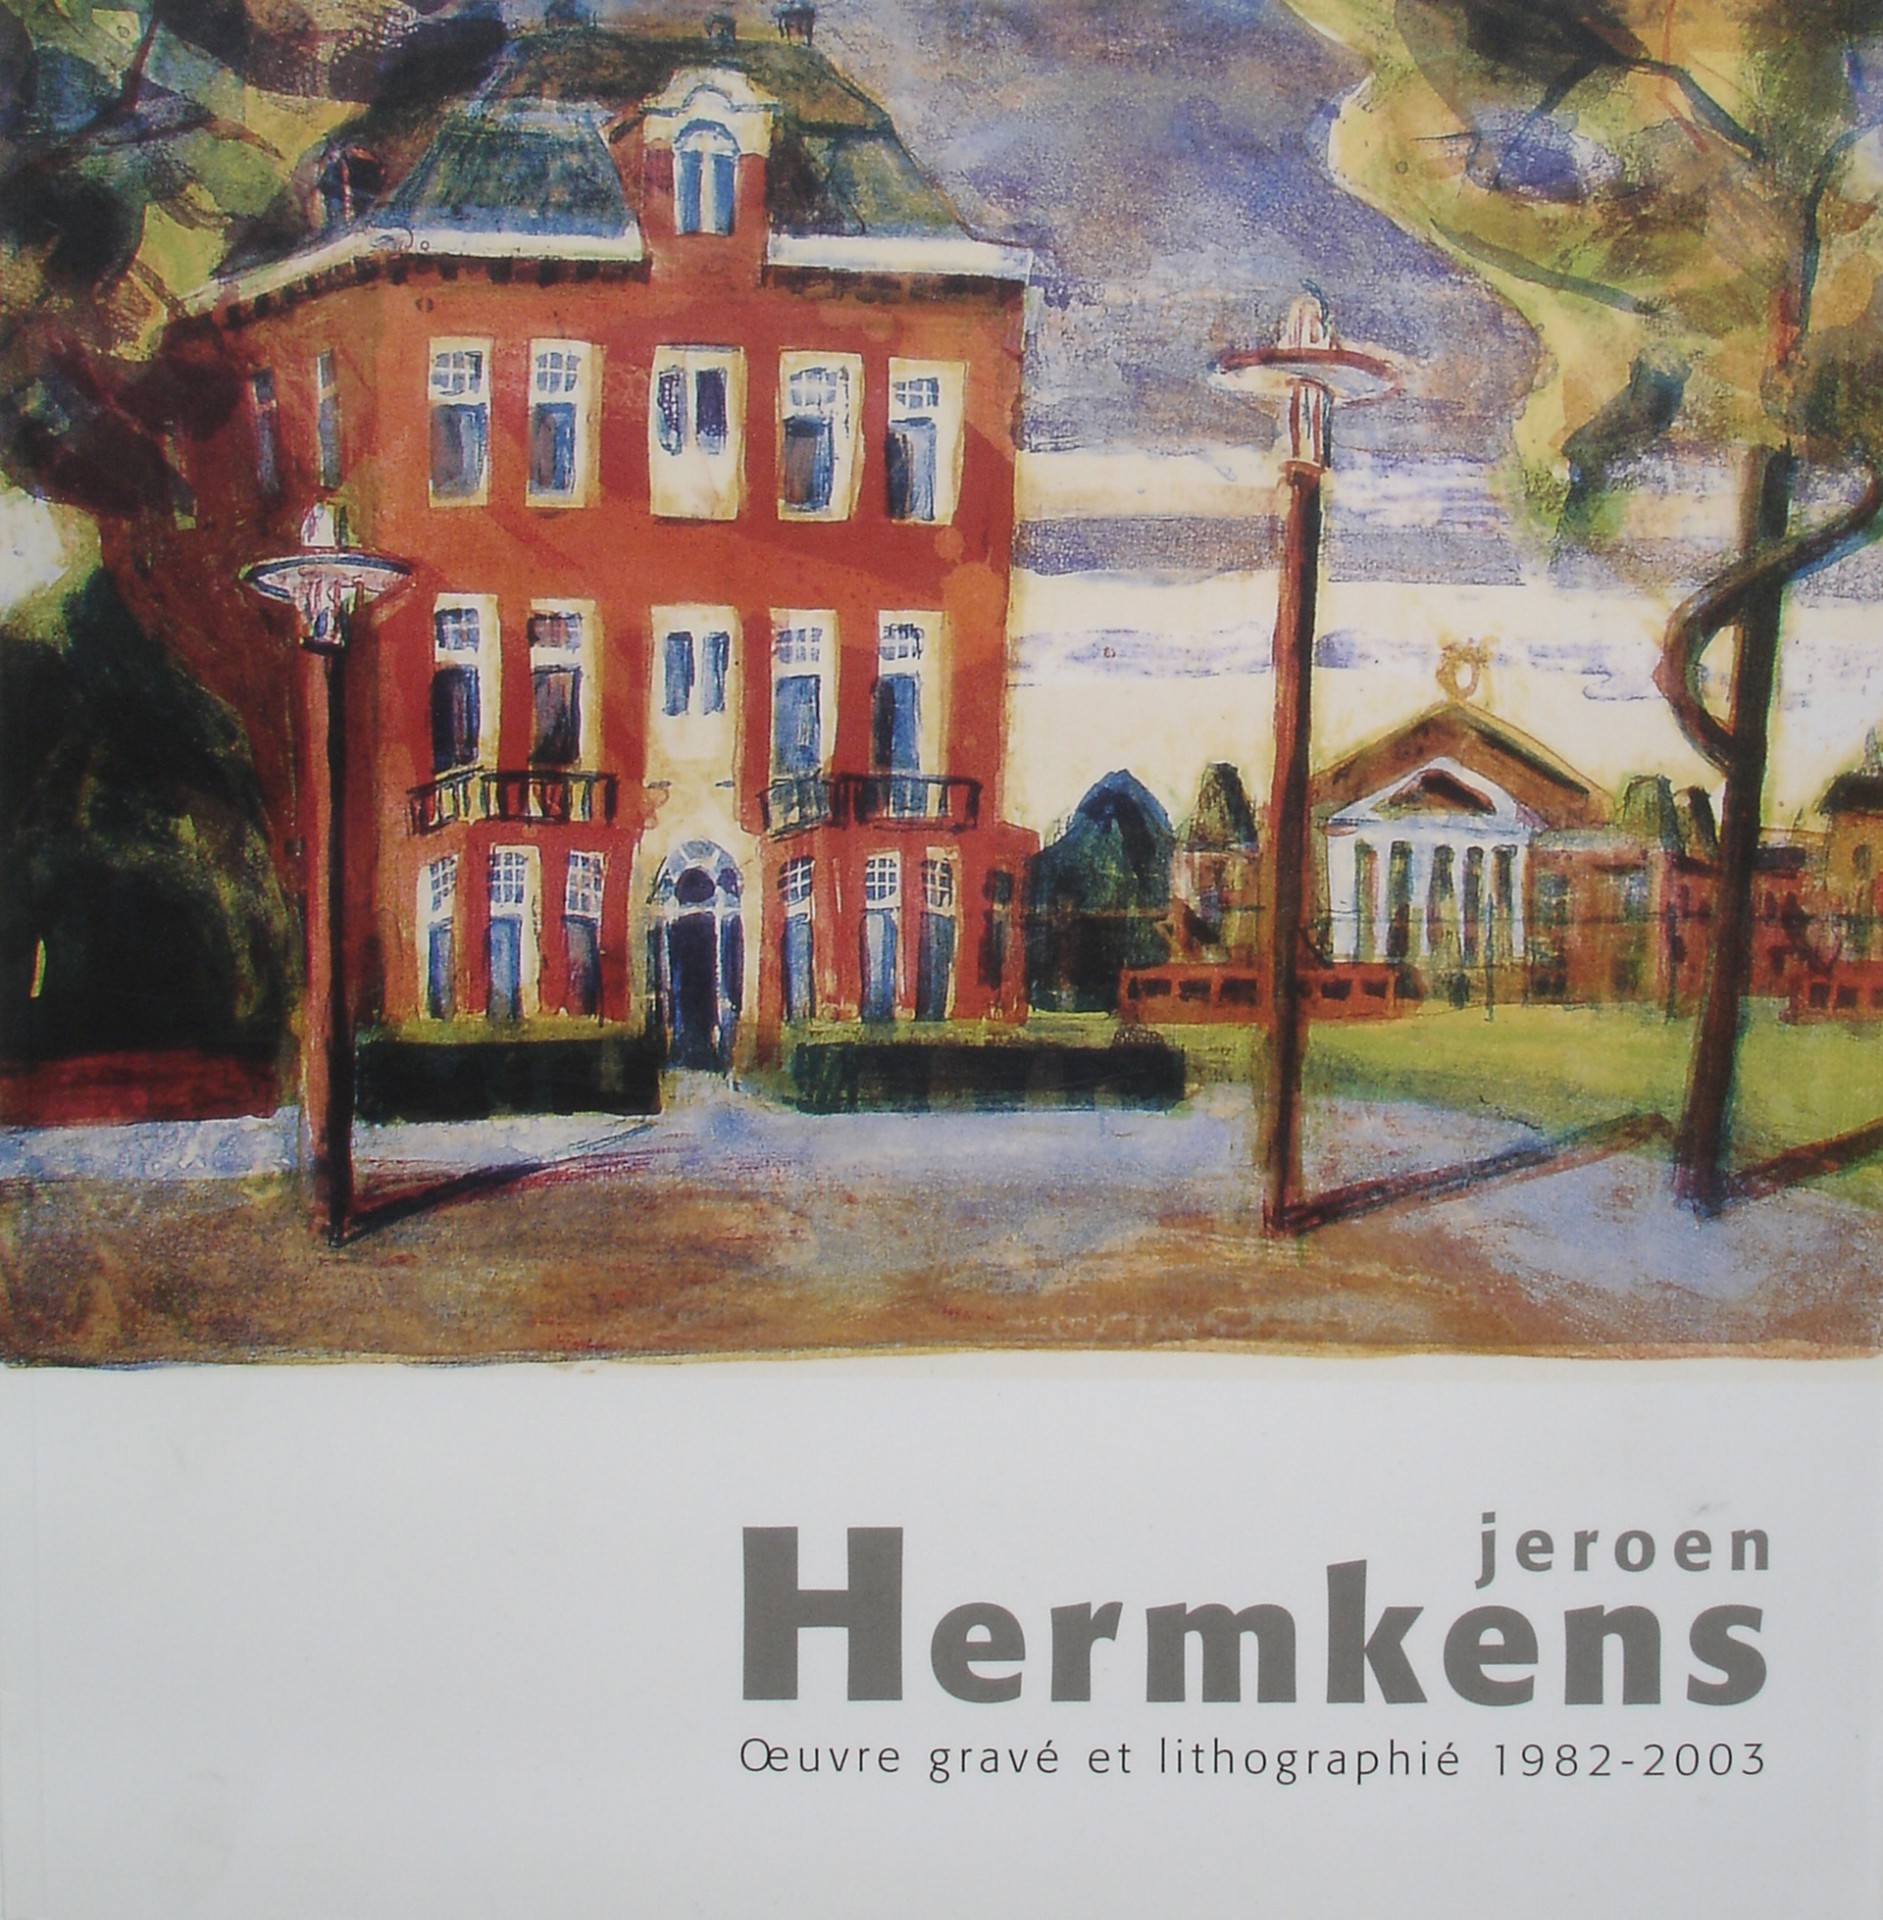 'Jeroen Hermkens-Oeuvre Grave Et Lithographie 1982-2003'